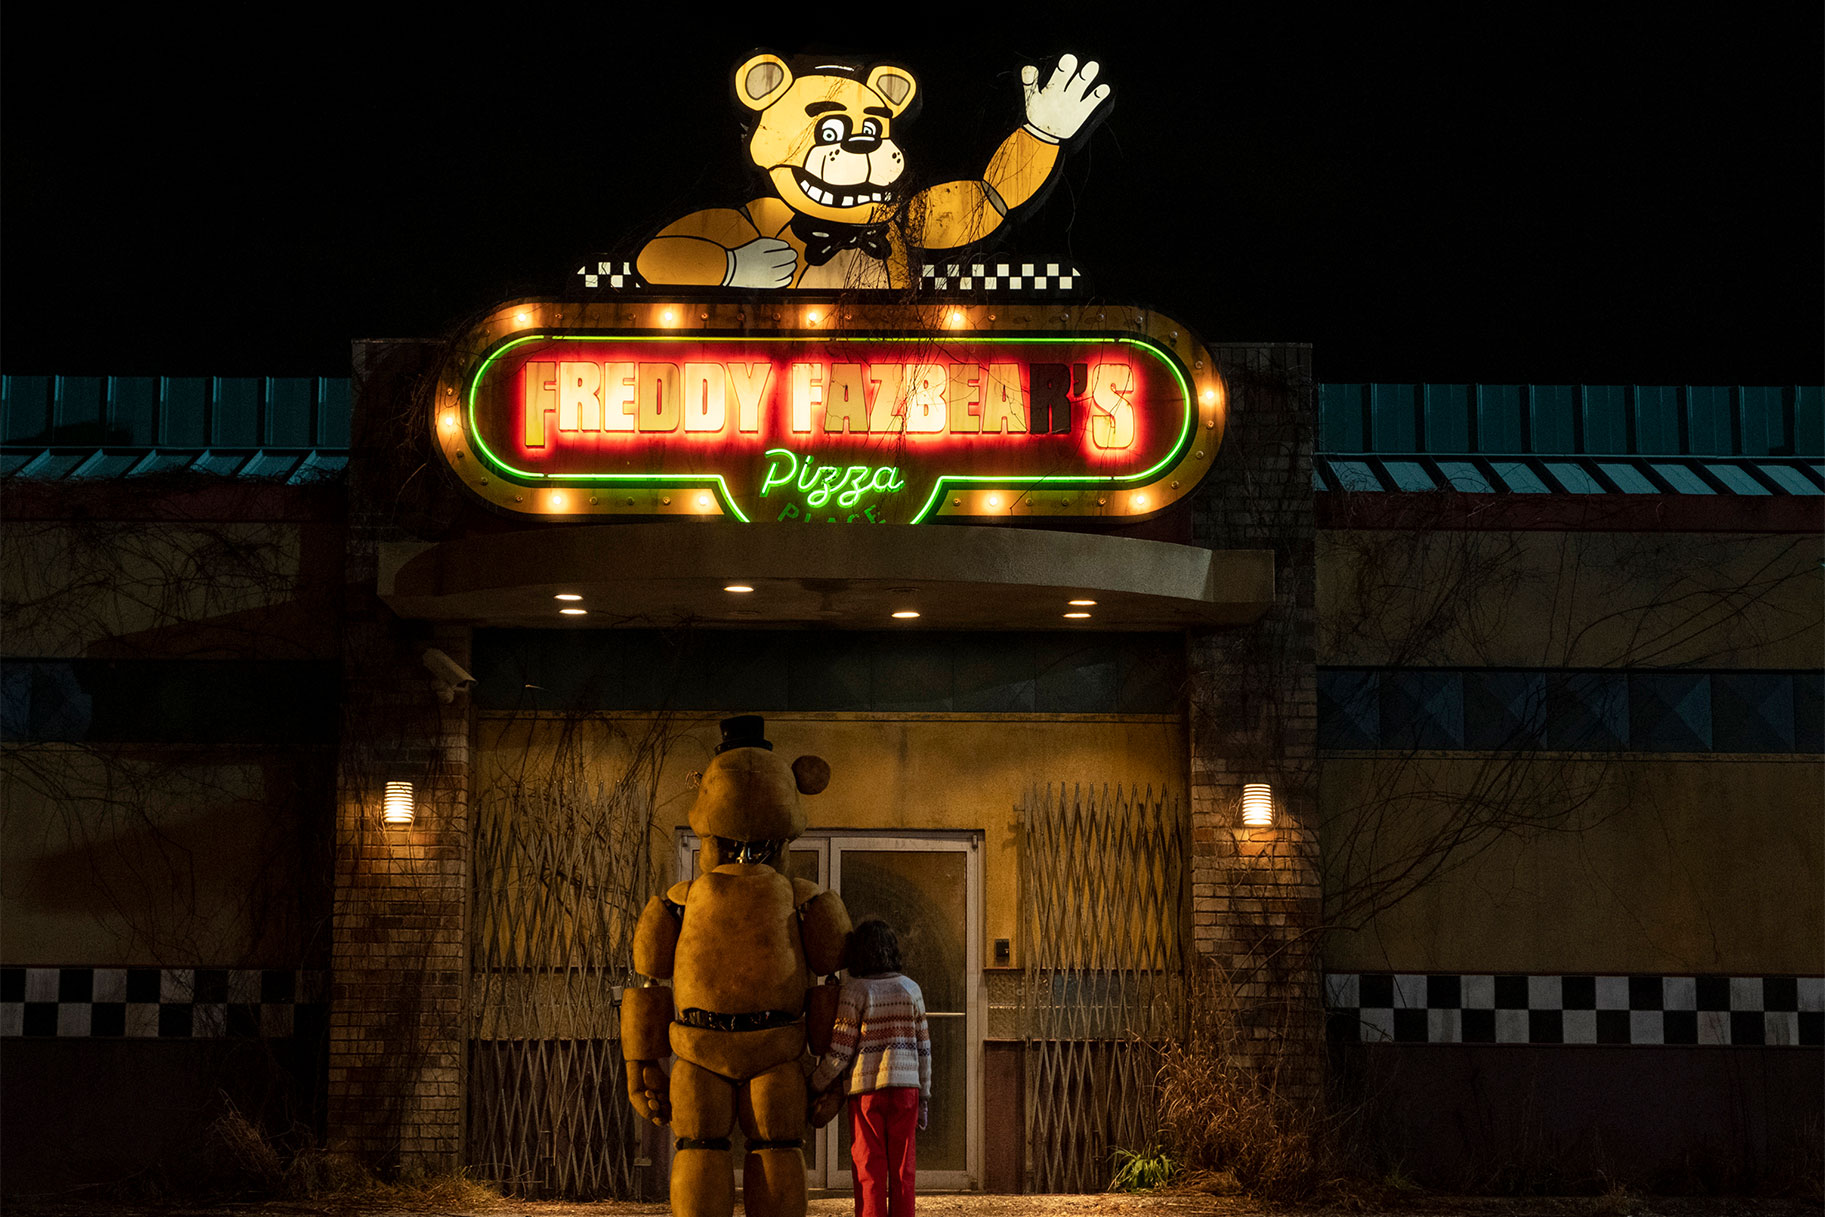 Is there an end-credit scene in the FNAF movie? Explained